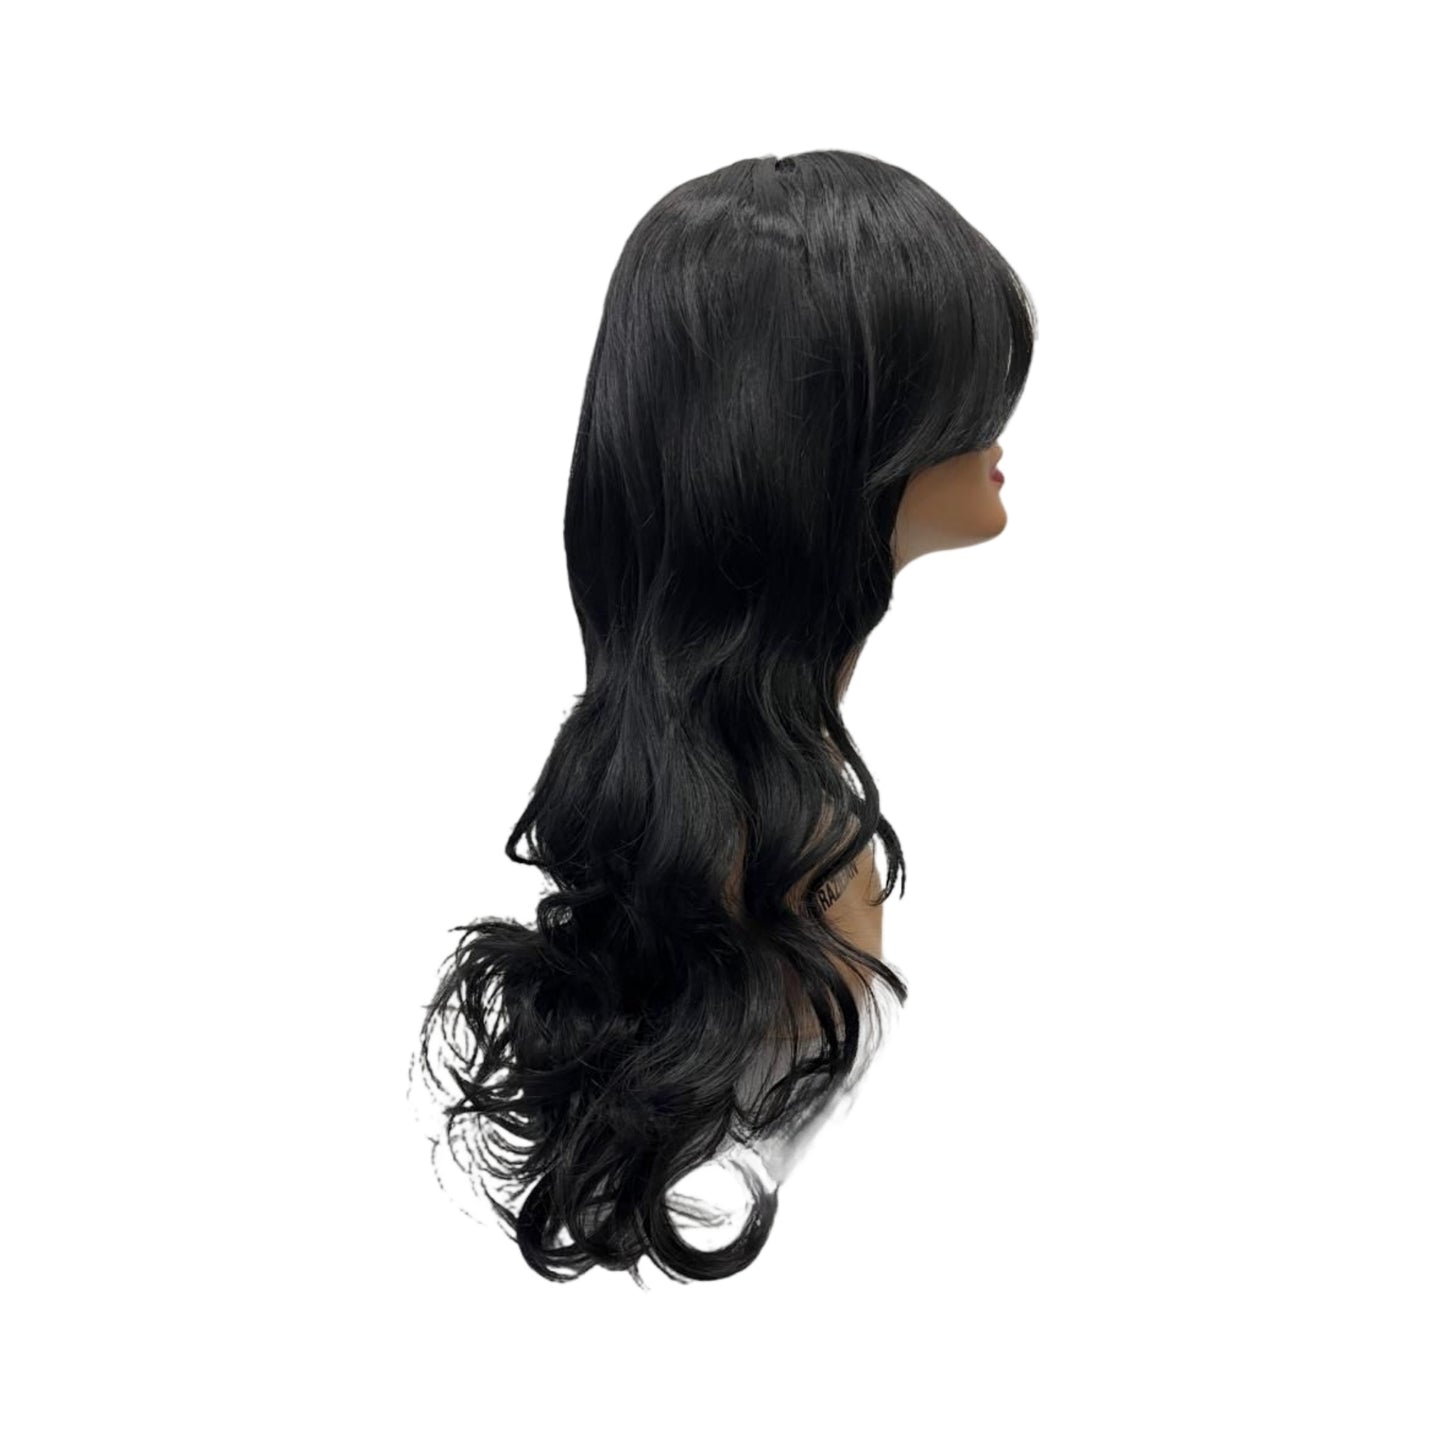 Long Synthetic Wig (#1) | A-005 | 28 inches | Durable | Breathable Cap